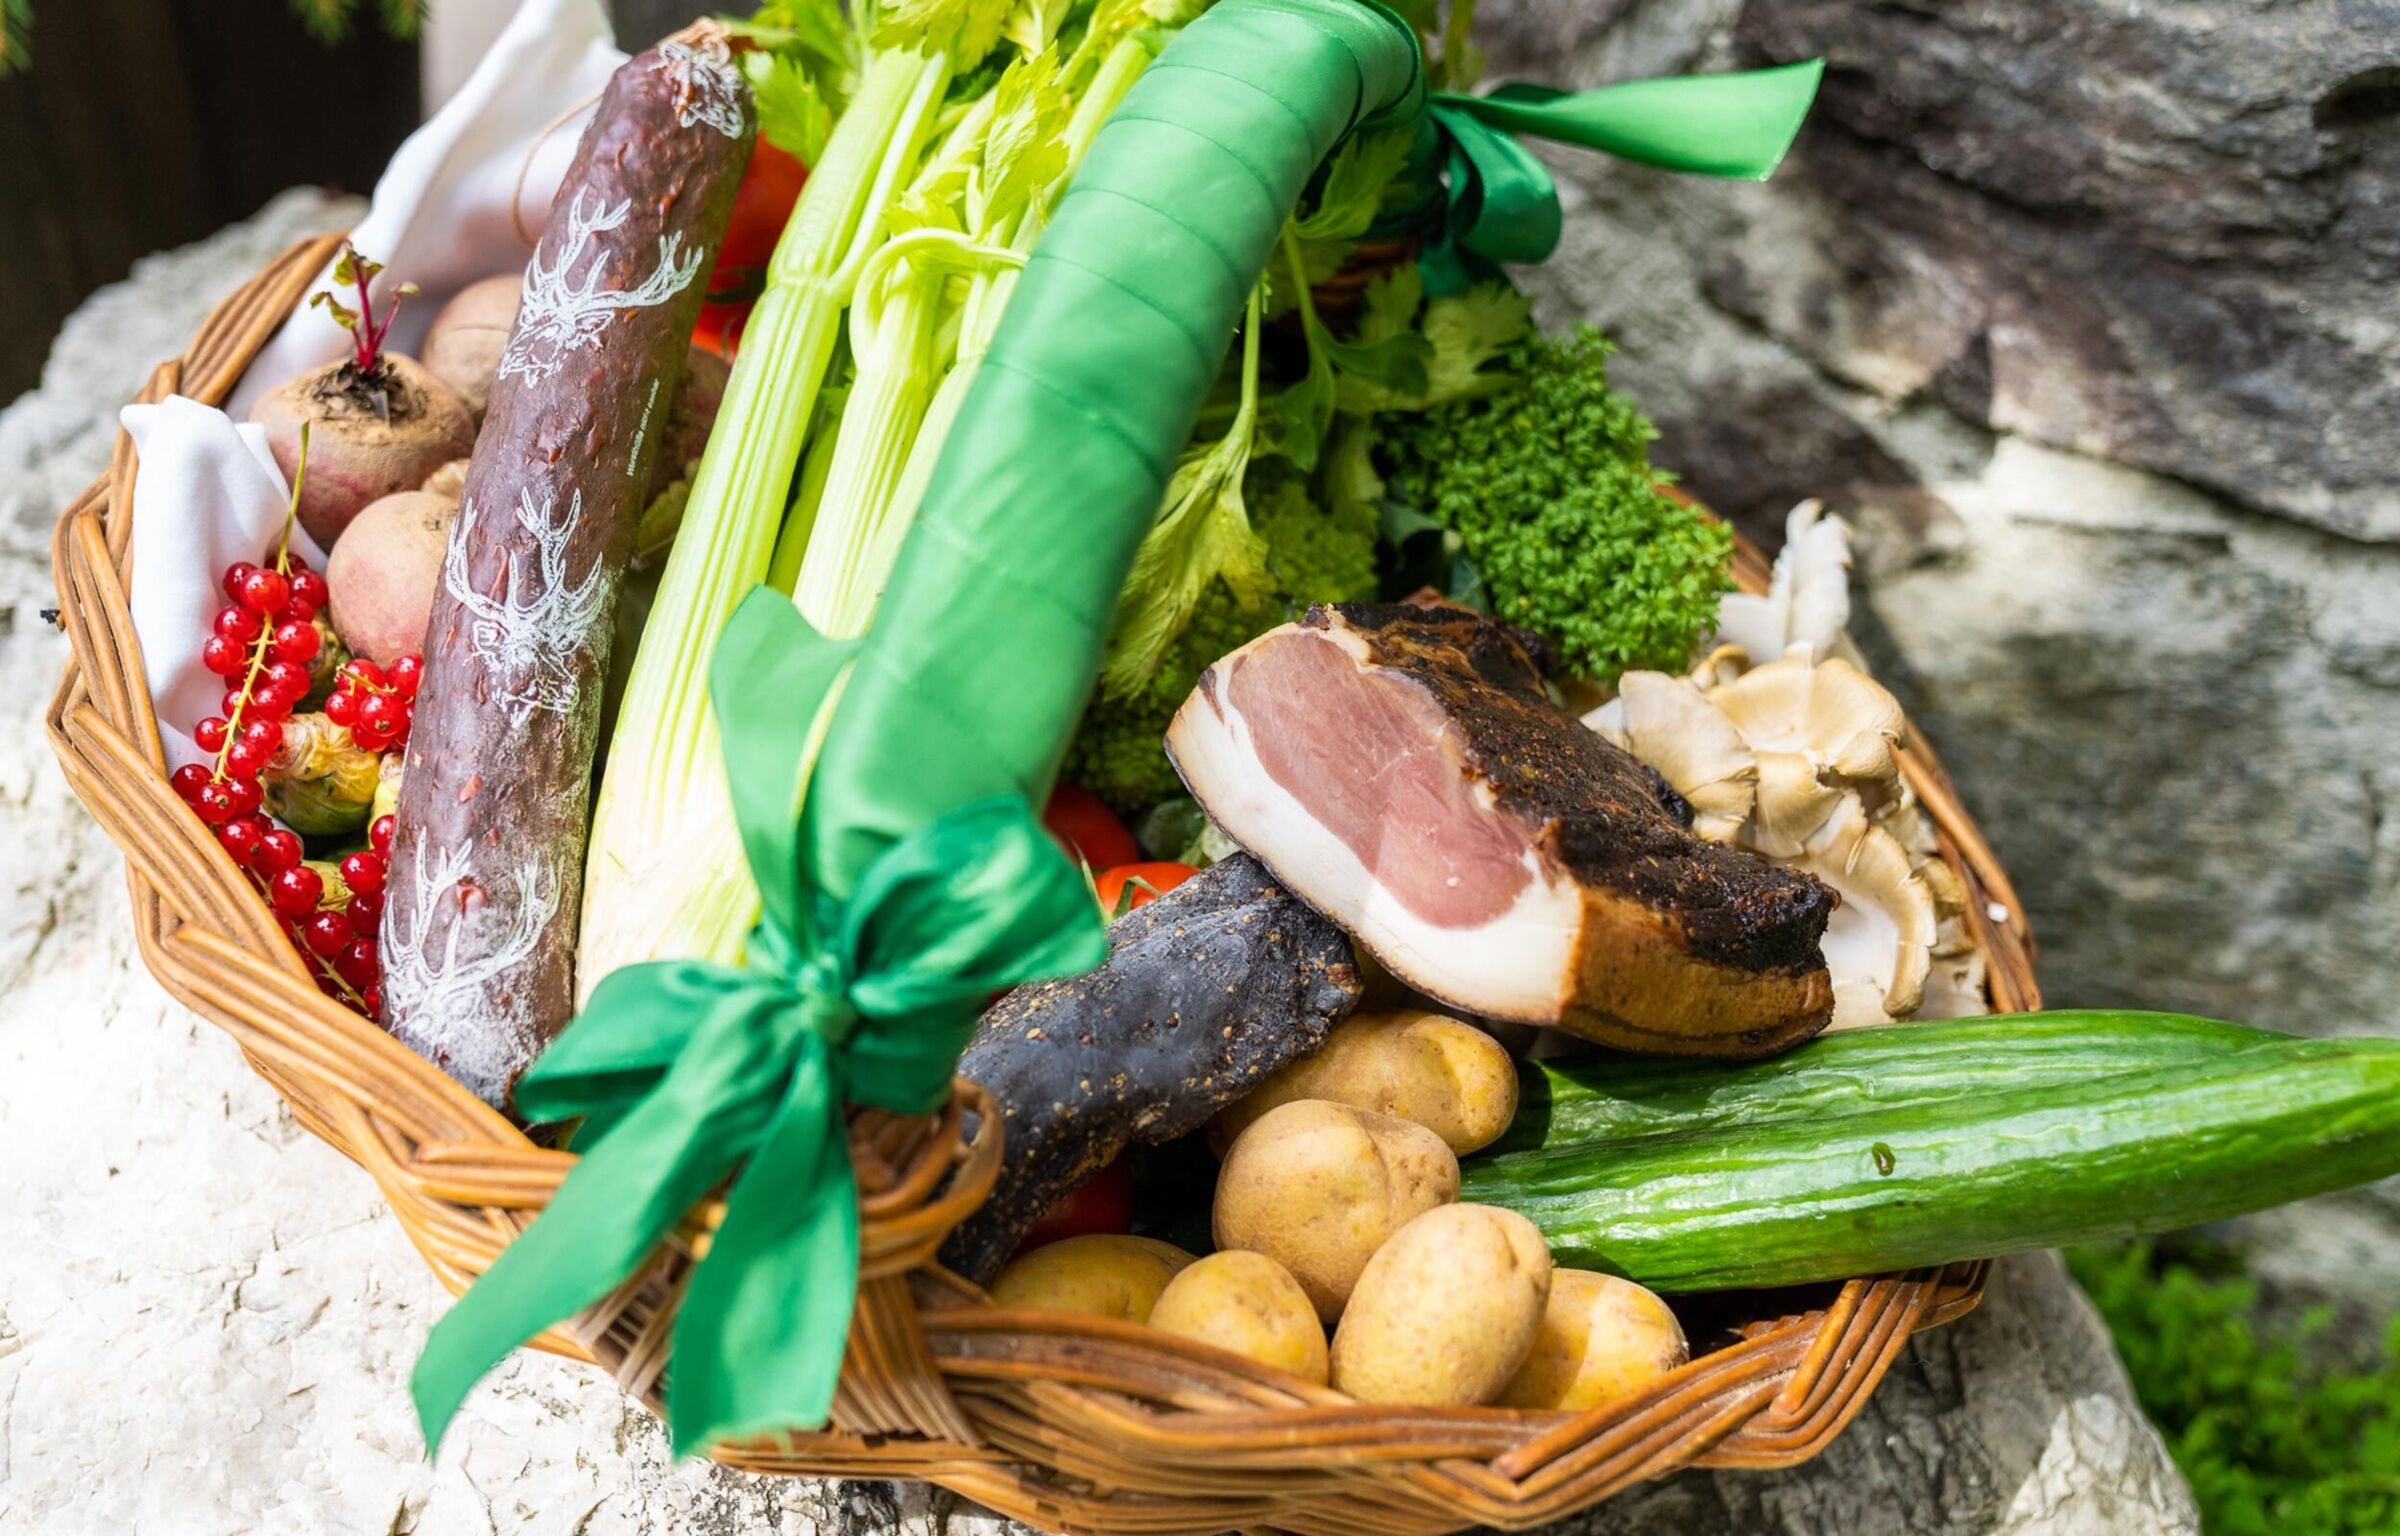 A basket full of regional products from bacon and salami to vegetables and potatoes.